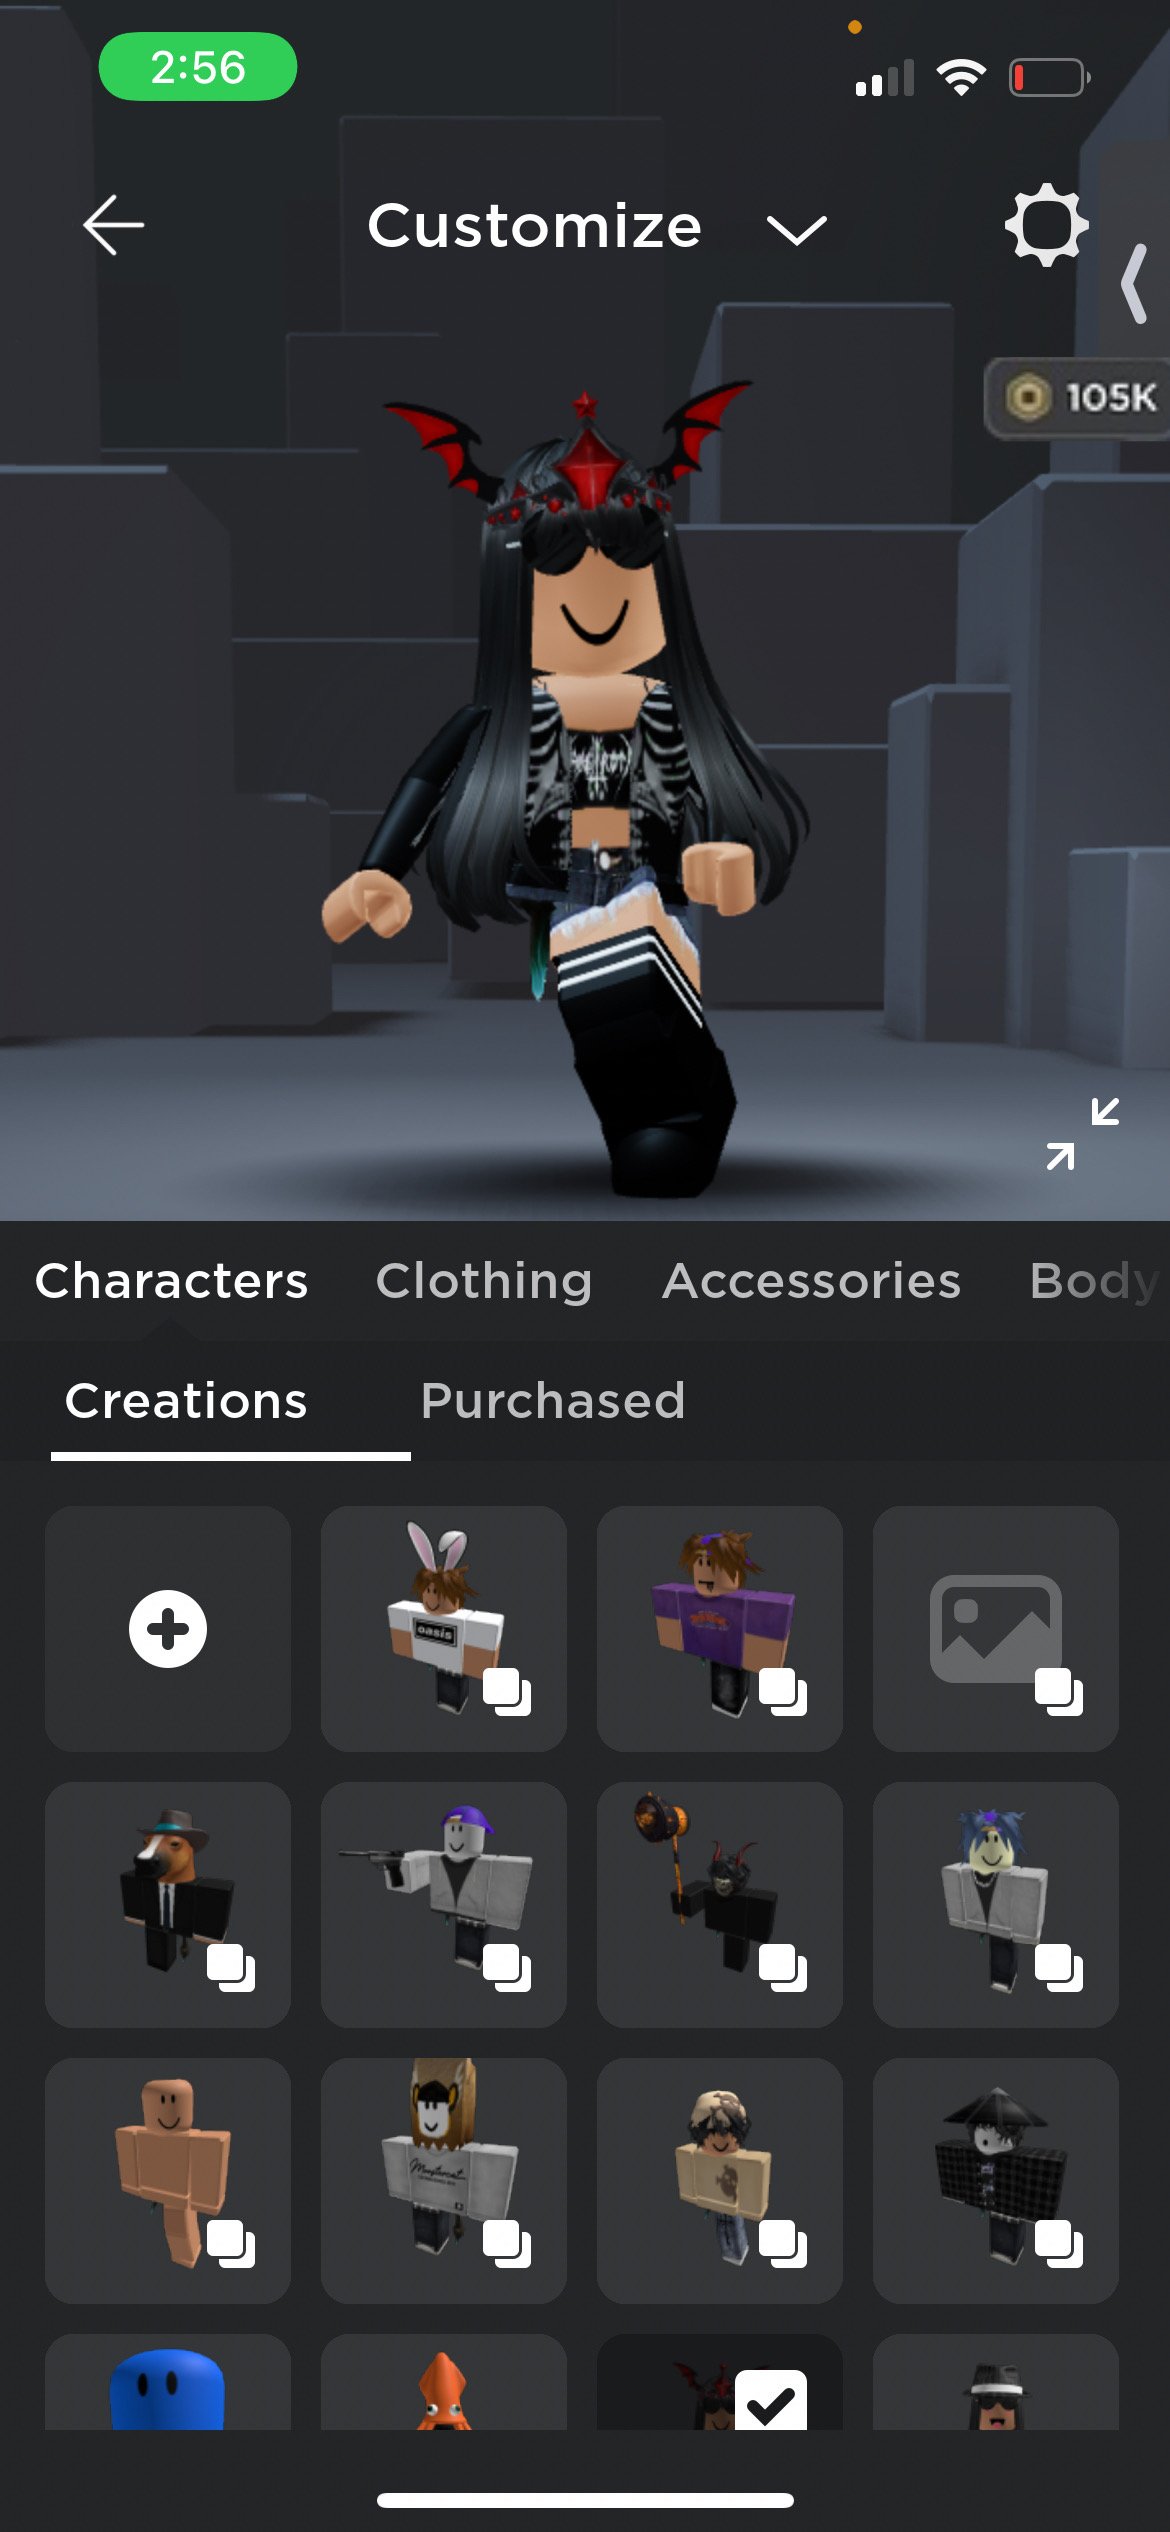 Fake how much robux you have on your roblox account by